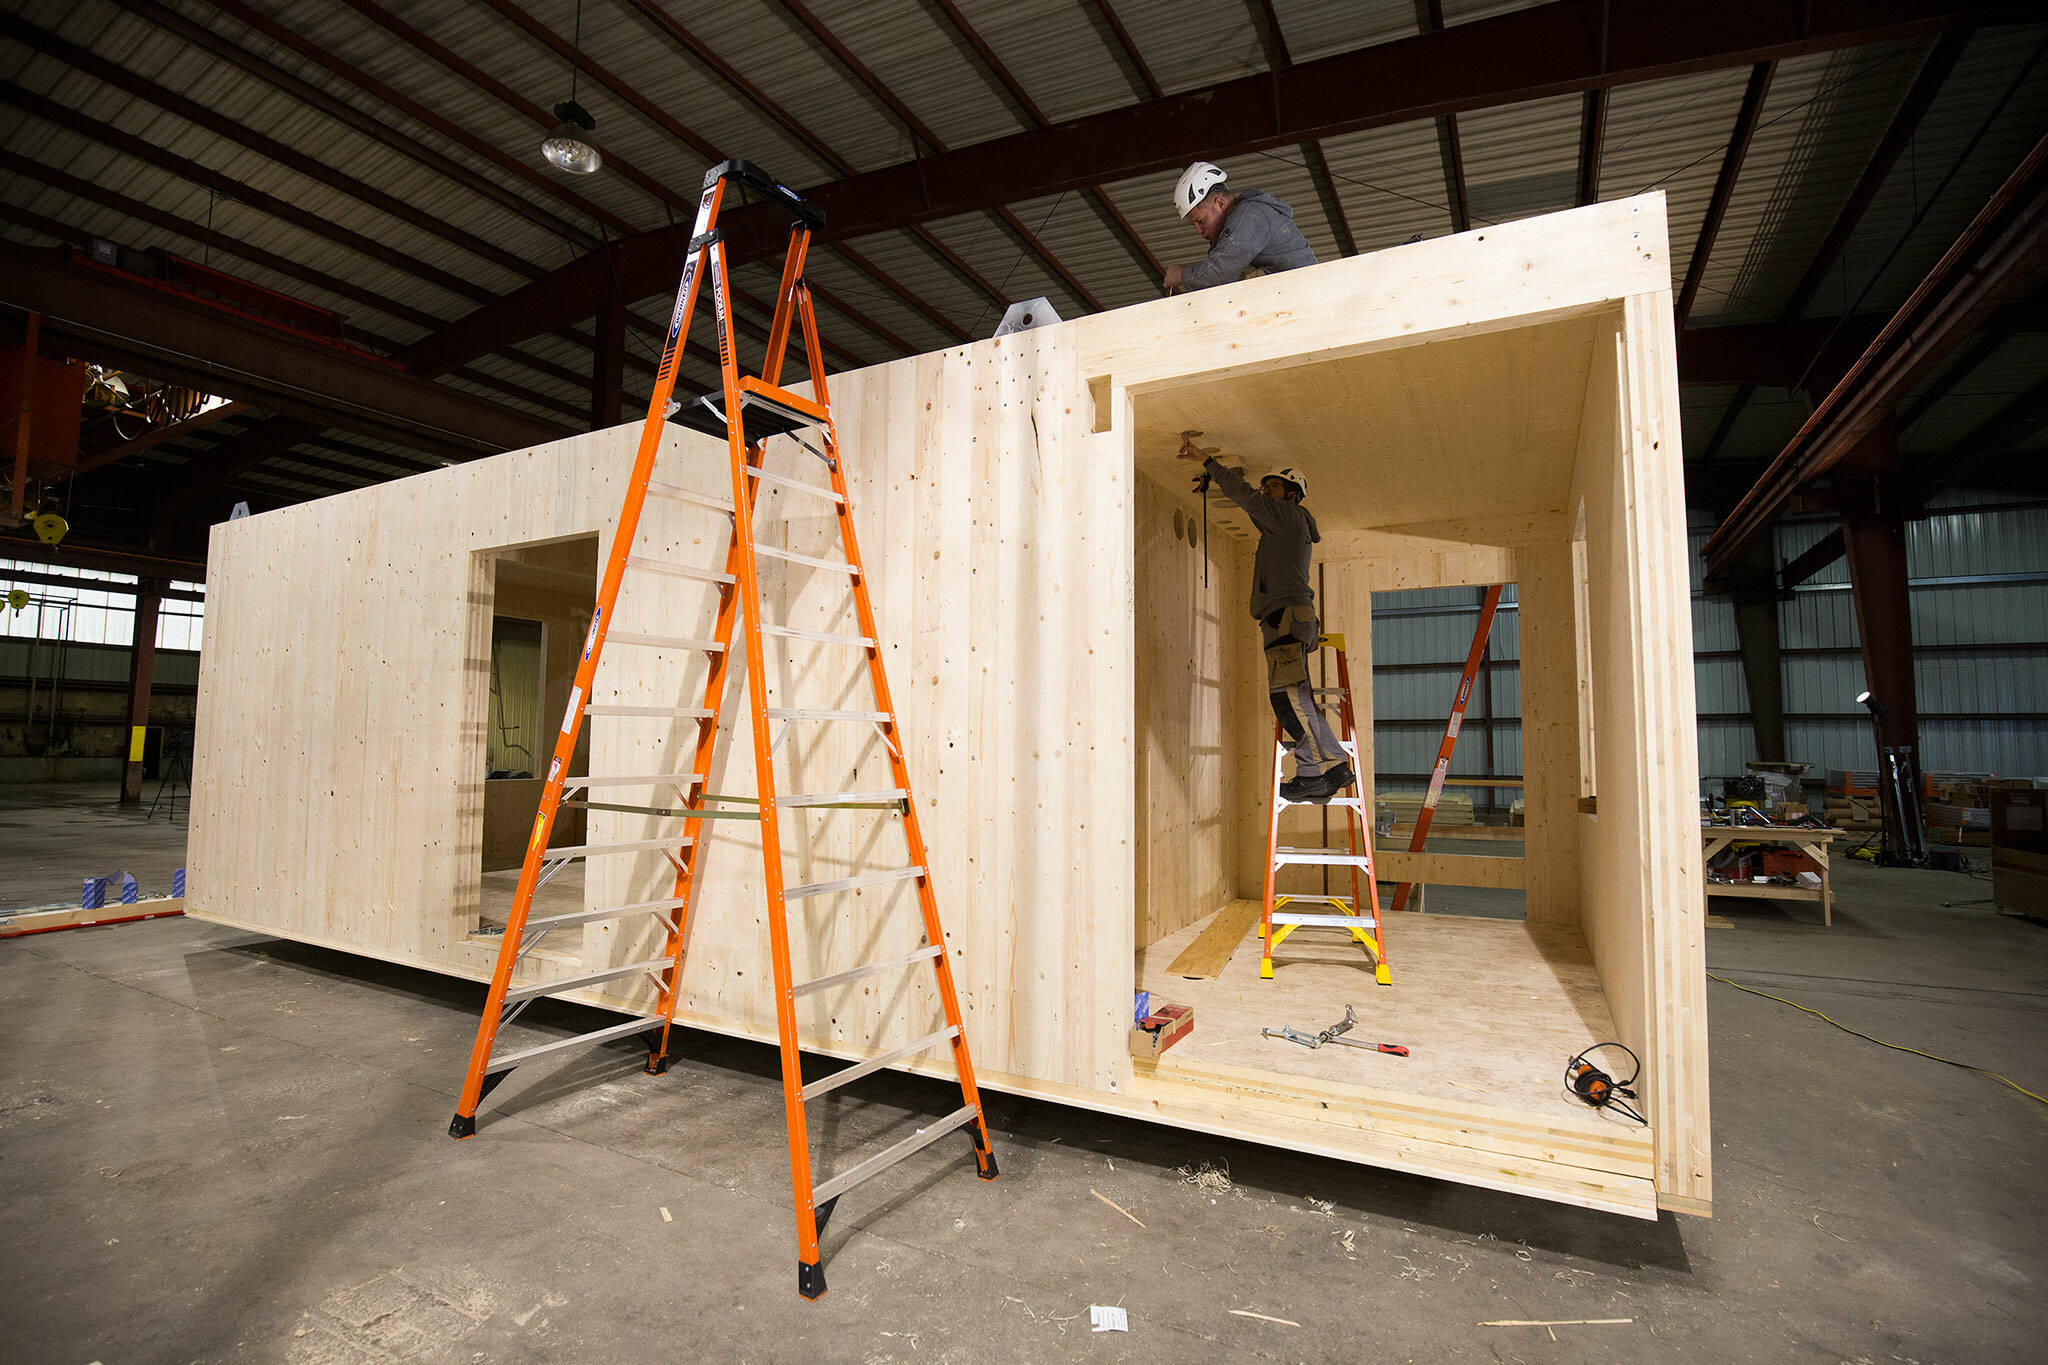 Carpenters from Switzerland build the first modular home made from cross-laminated timber inside a warehouse on Marine View Drive in Everett. (Andy Bronson / The Herald)